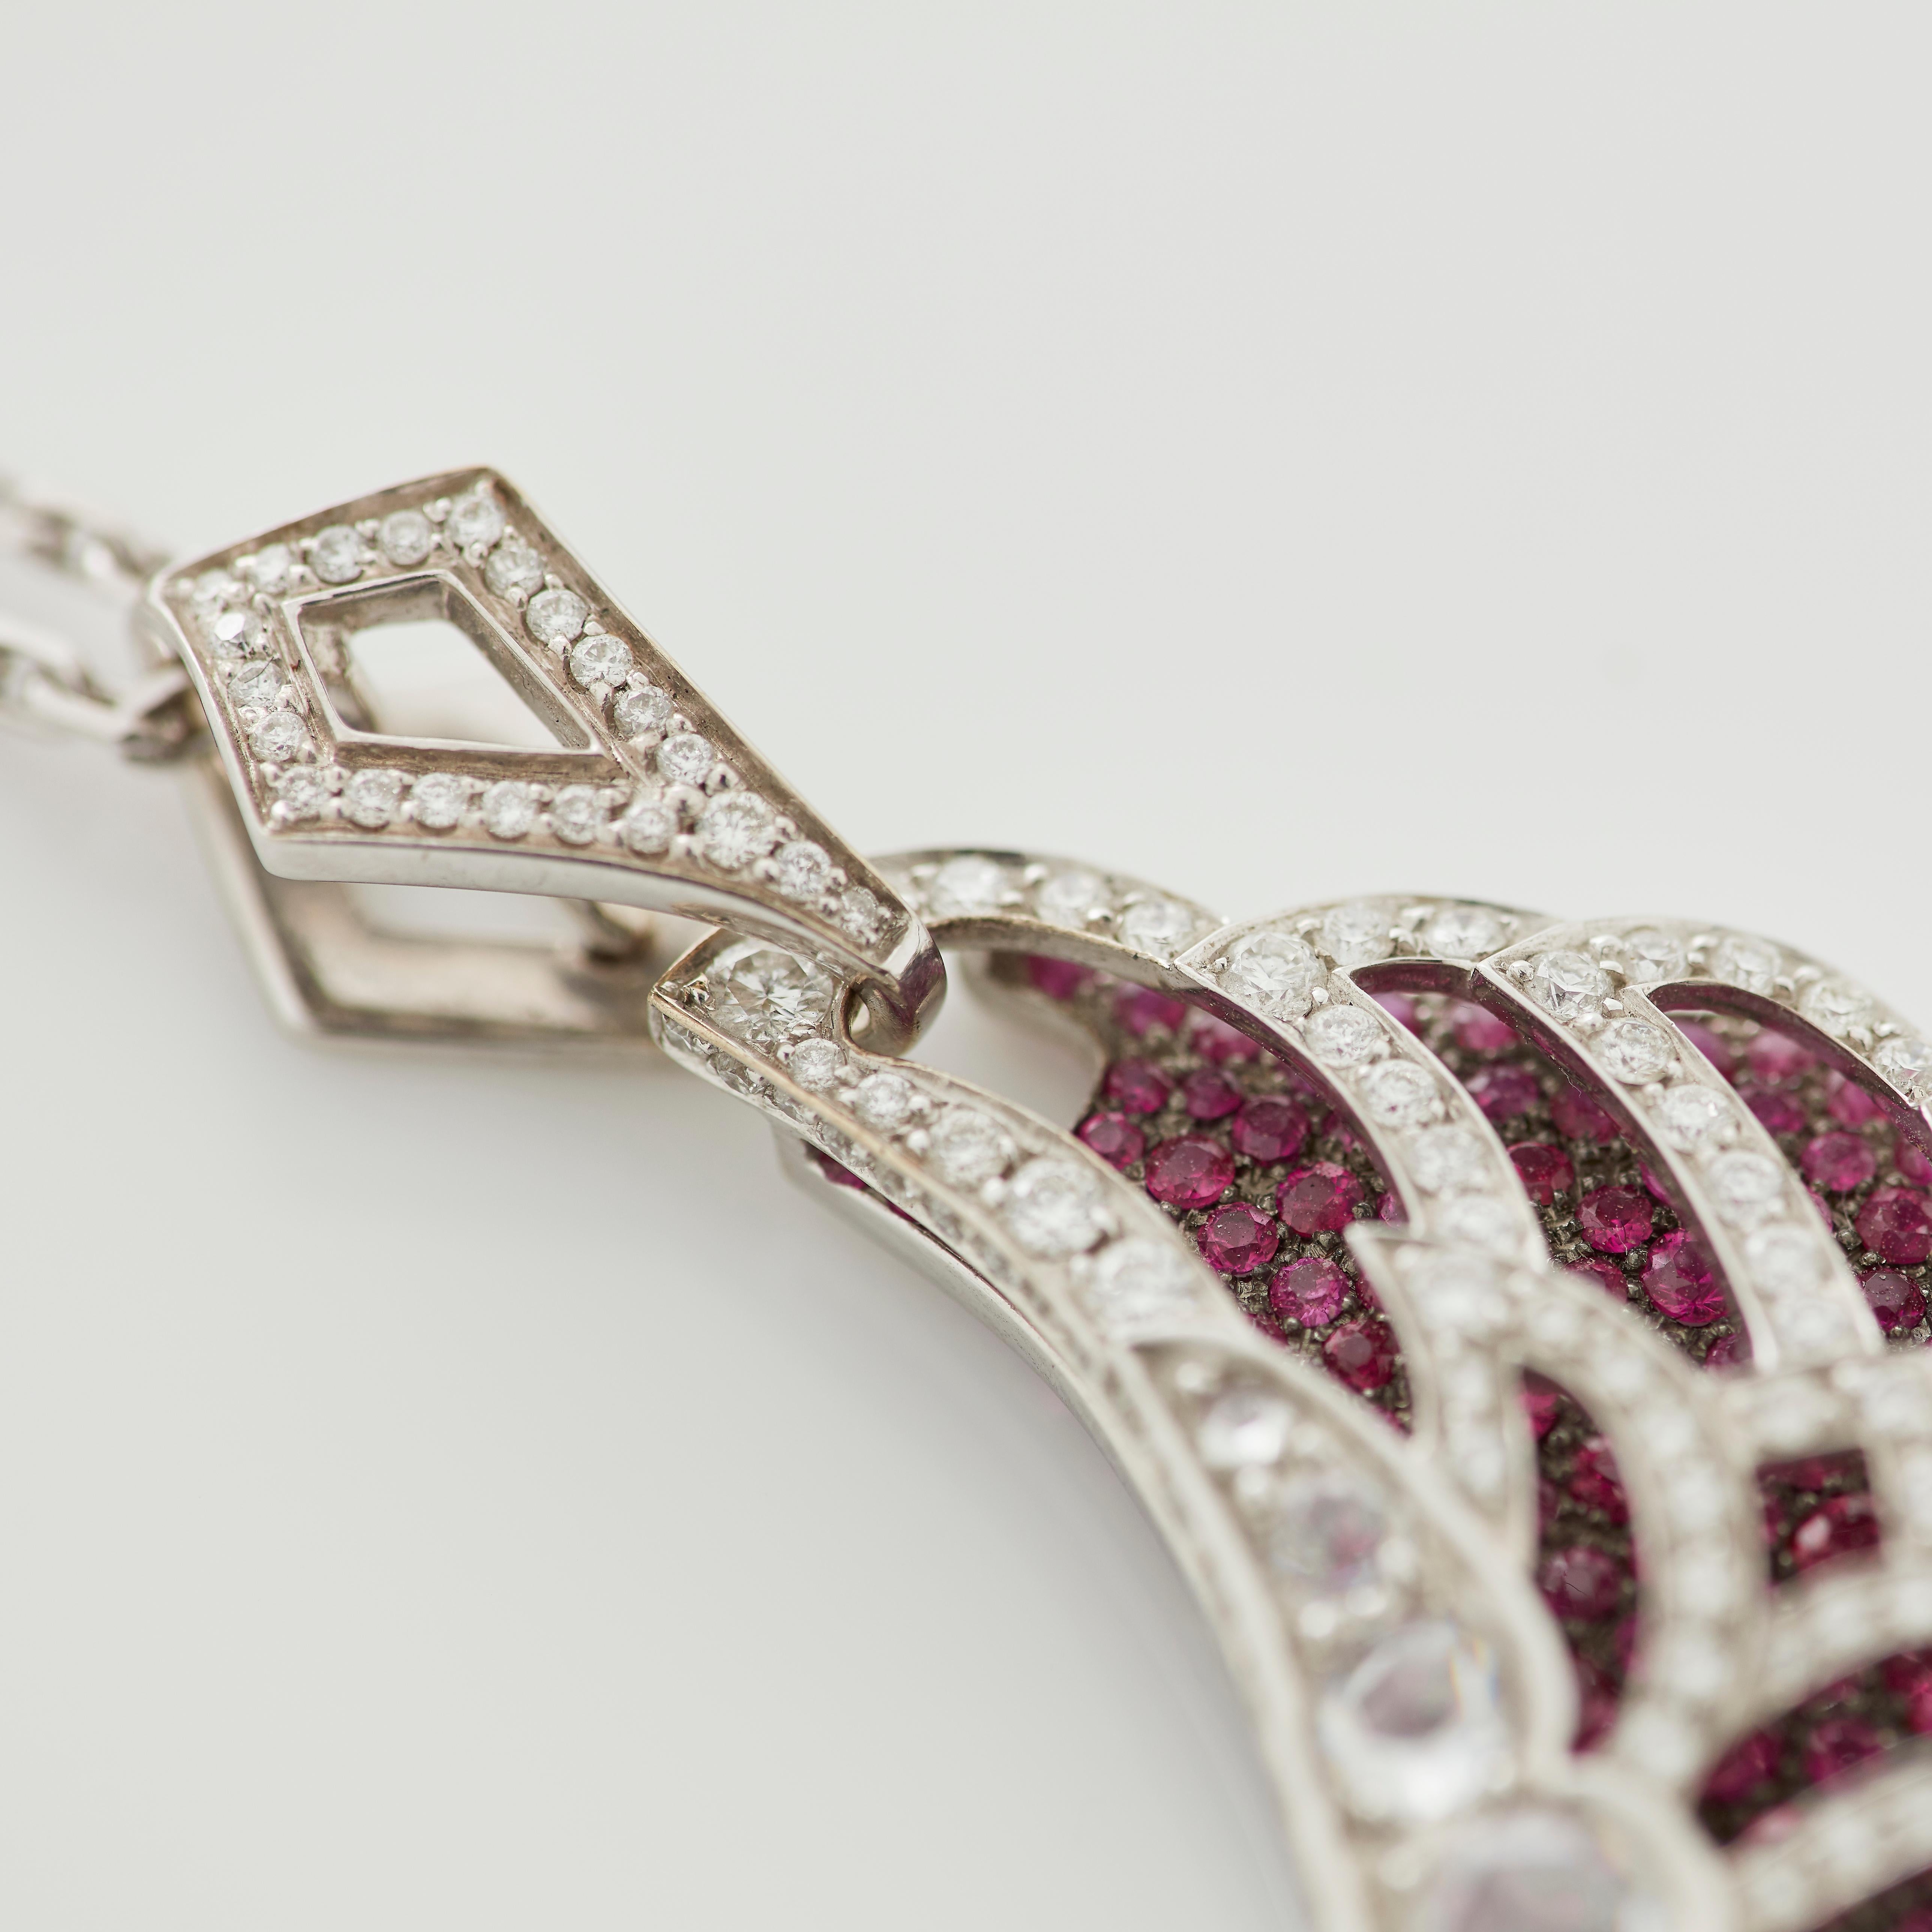 Garrard 'Wings Lace' 18 Karat White Gold Rose Cut Diamond and Ruby Drop Pendant In New Condition For Sale In London, London